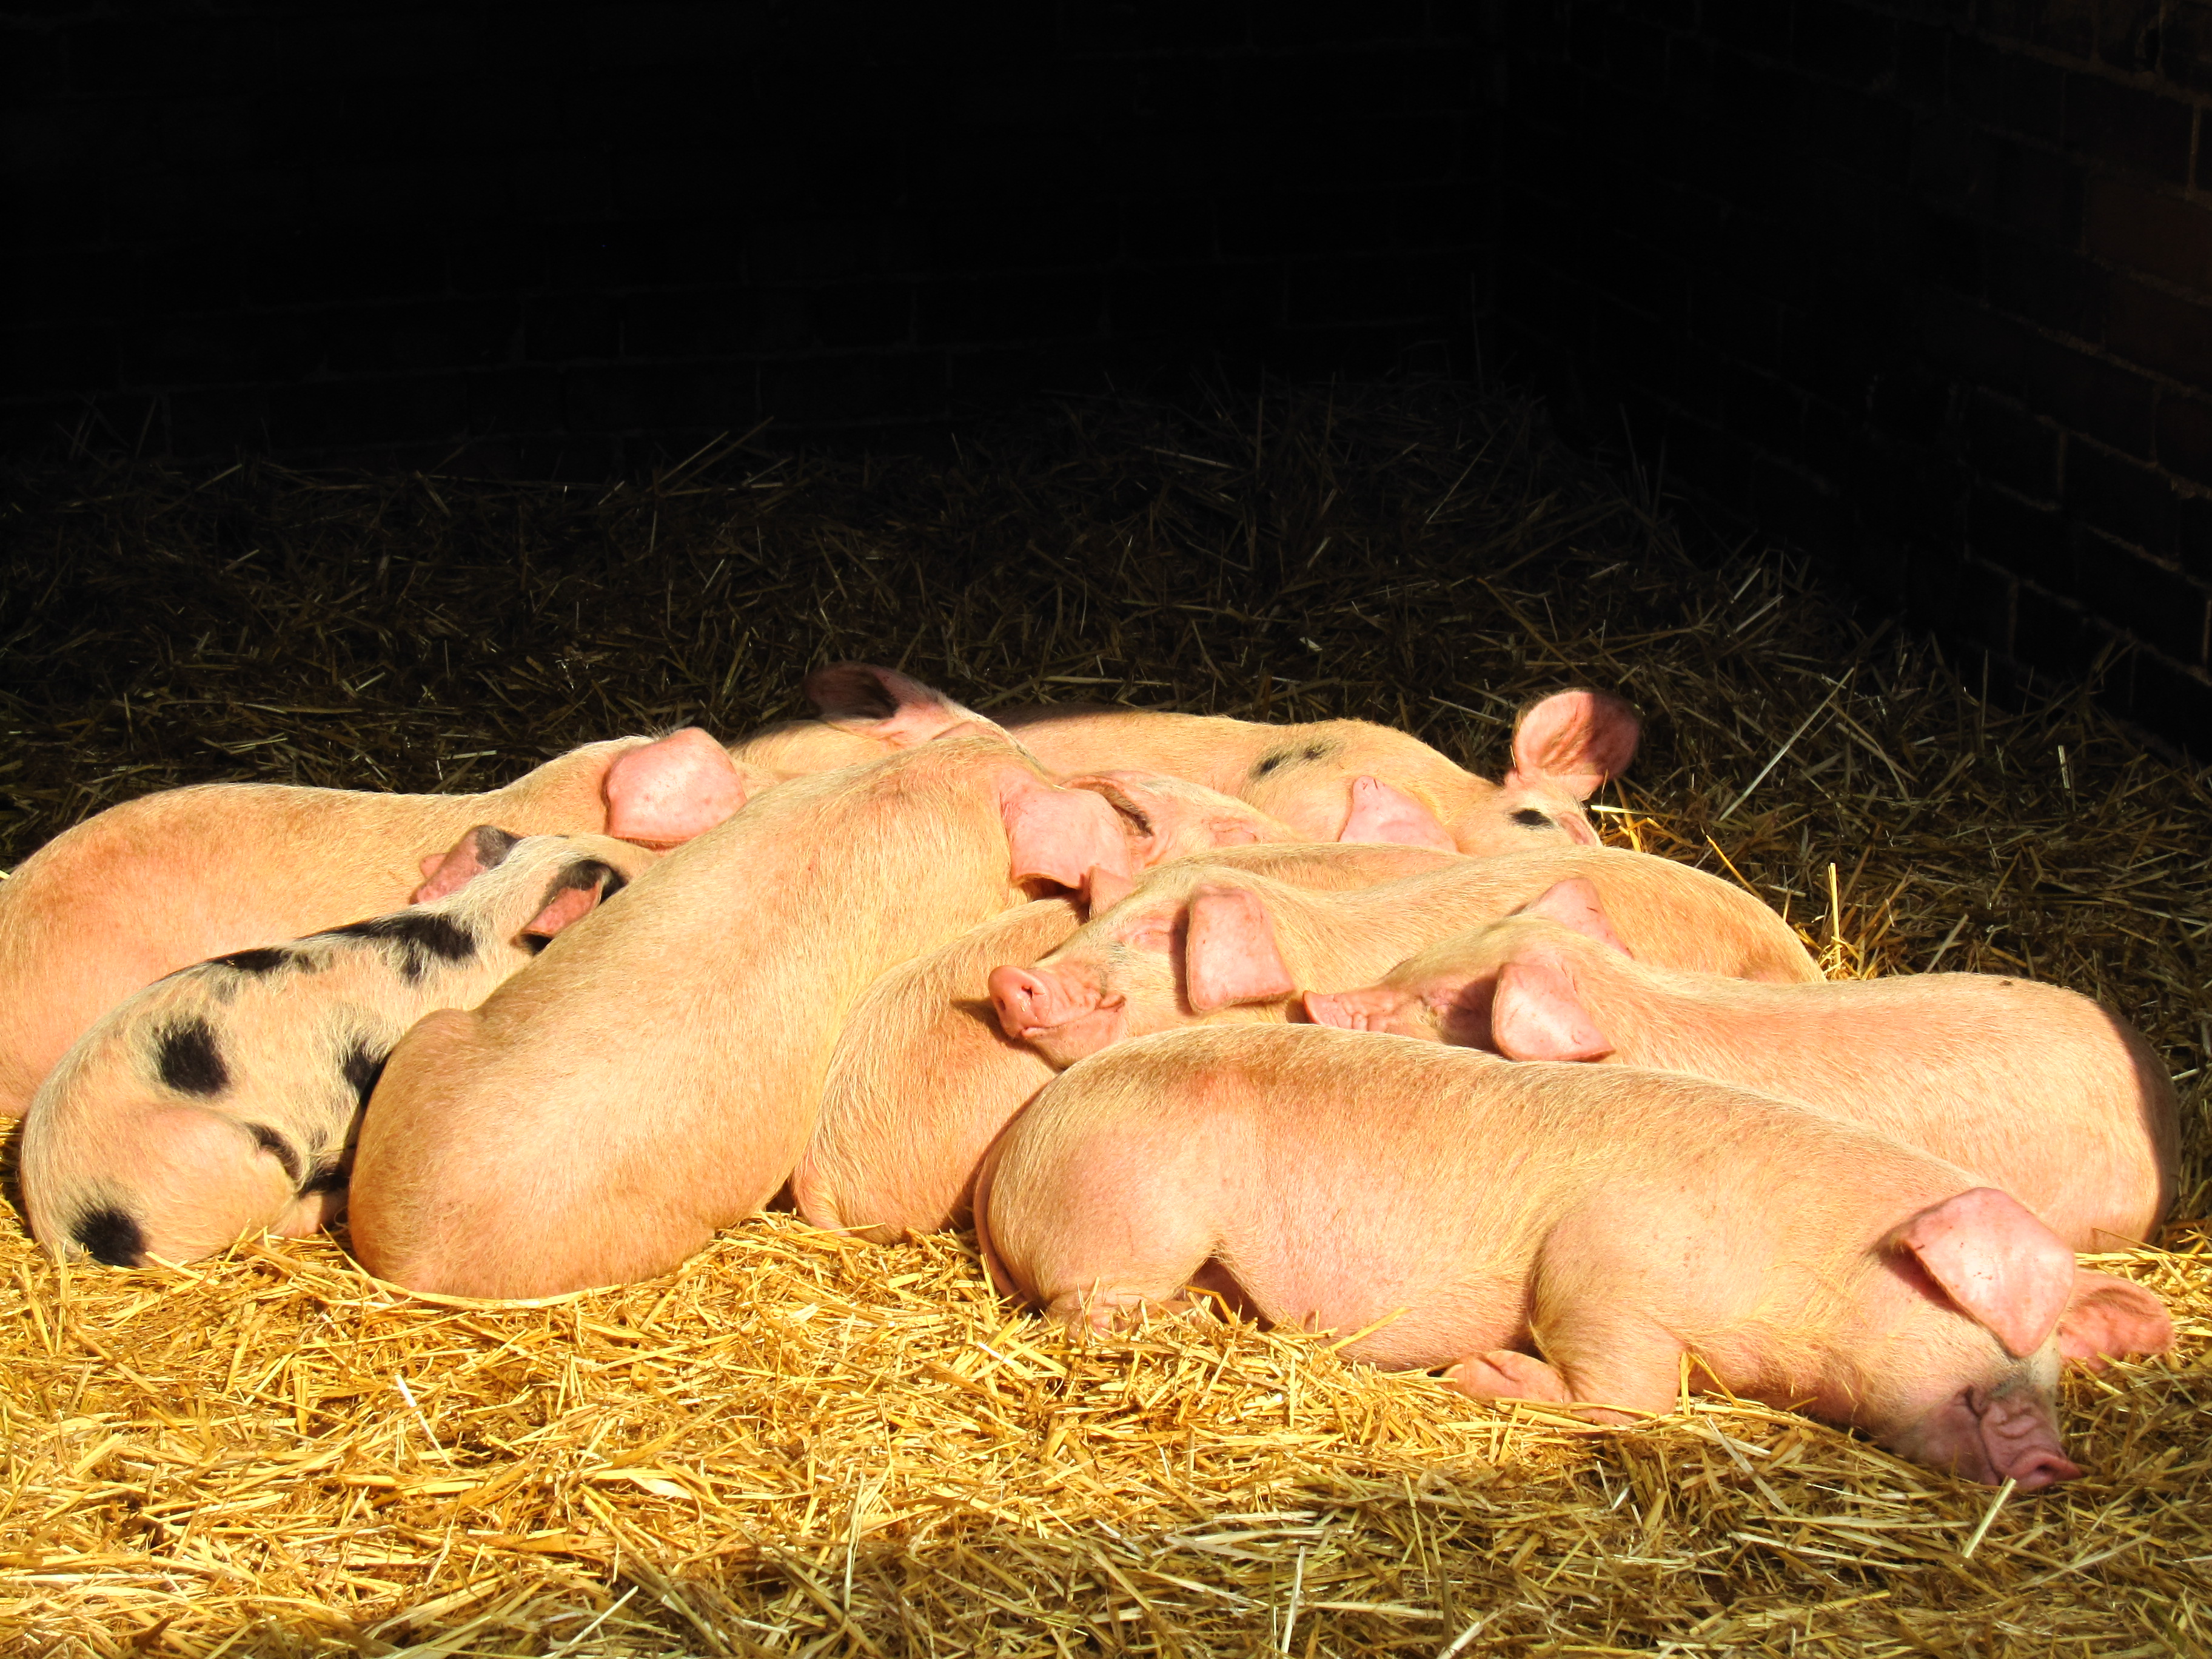 There is nothing more contented than a heap of piglets!